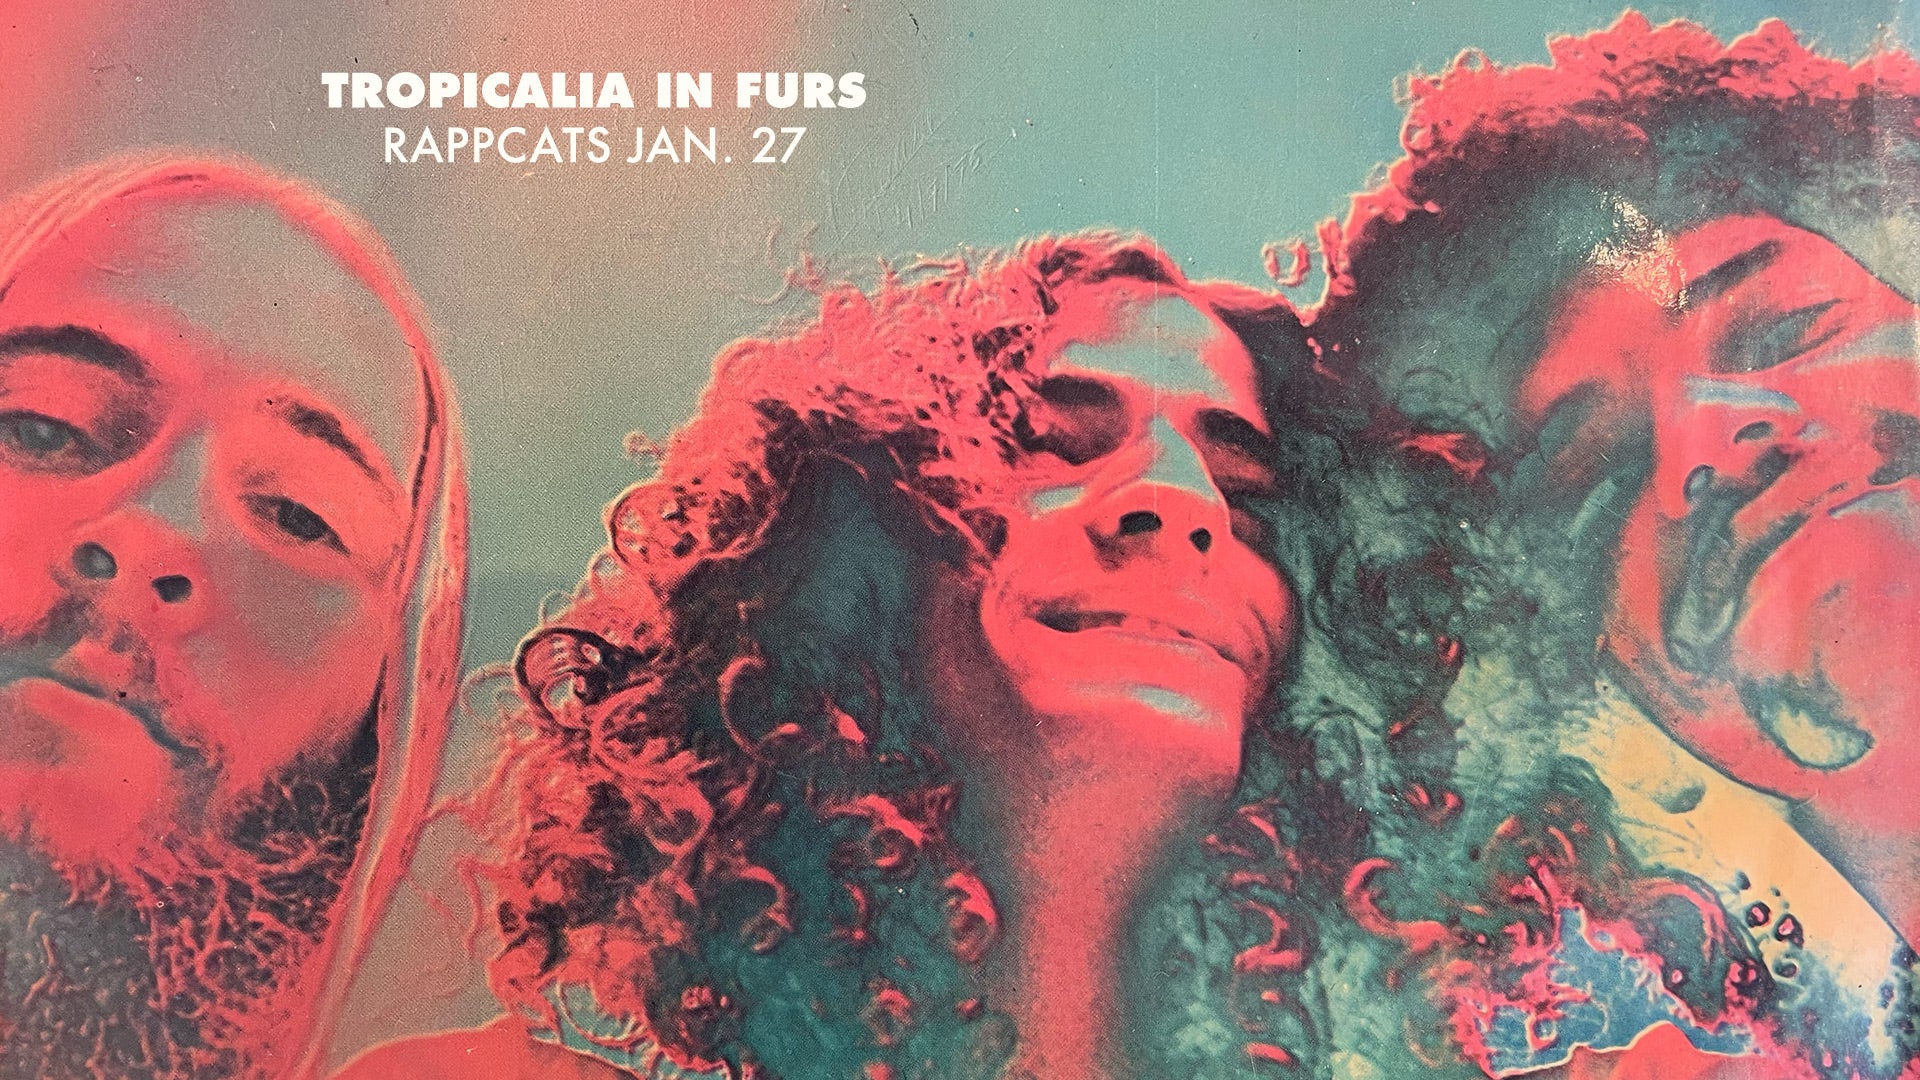 Tropicalia in Furs at Rappcats. Extra day, Saturday, January 27.